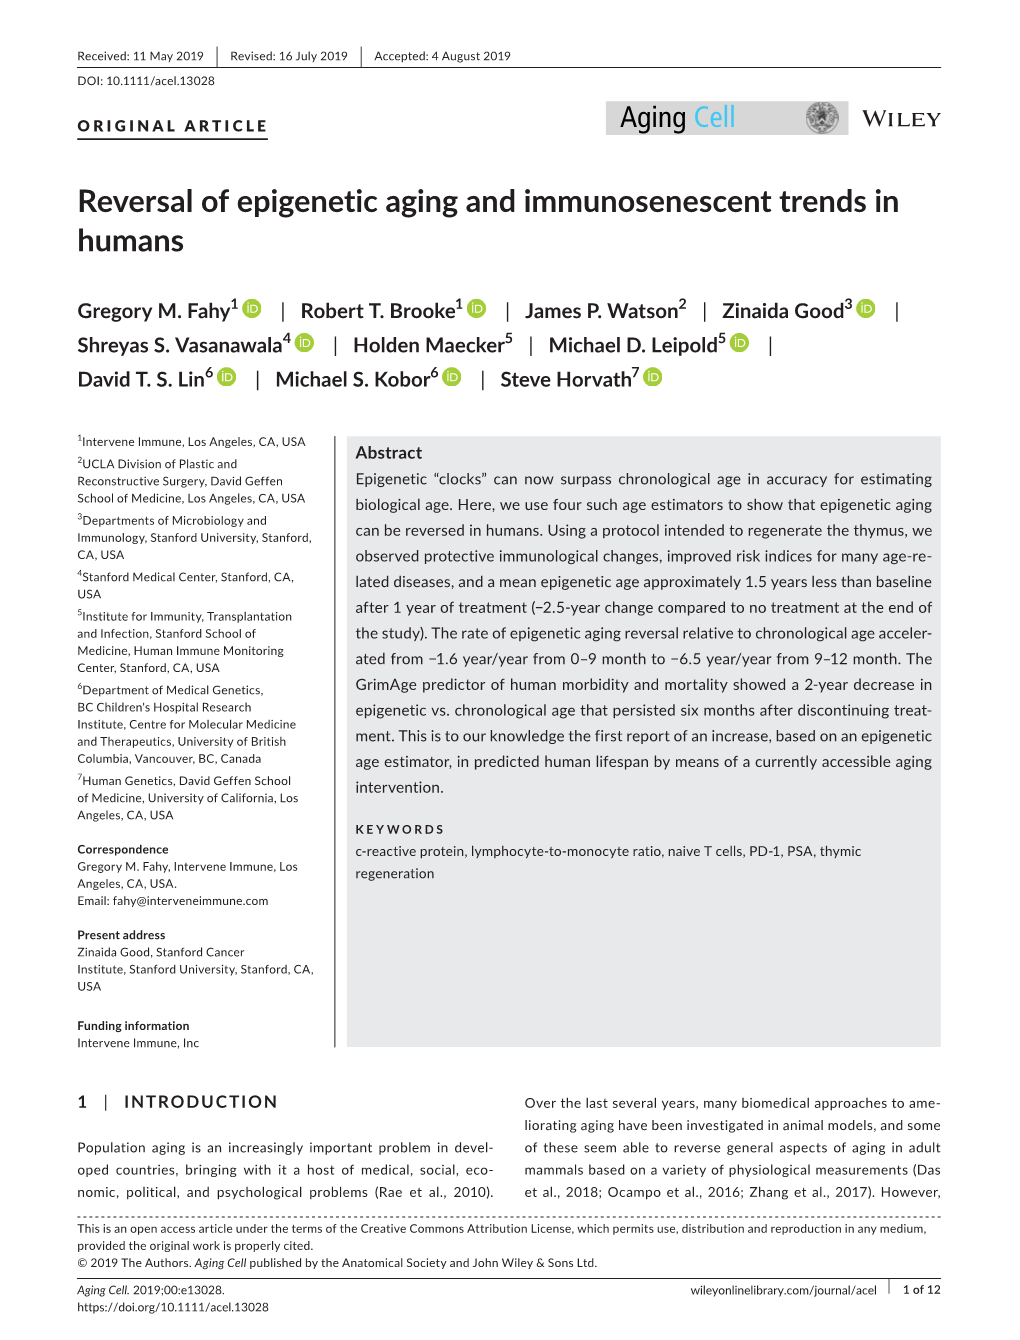 Reversal of Epigenetic Aging and Immunosenescent Trends in Humans